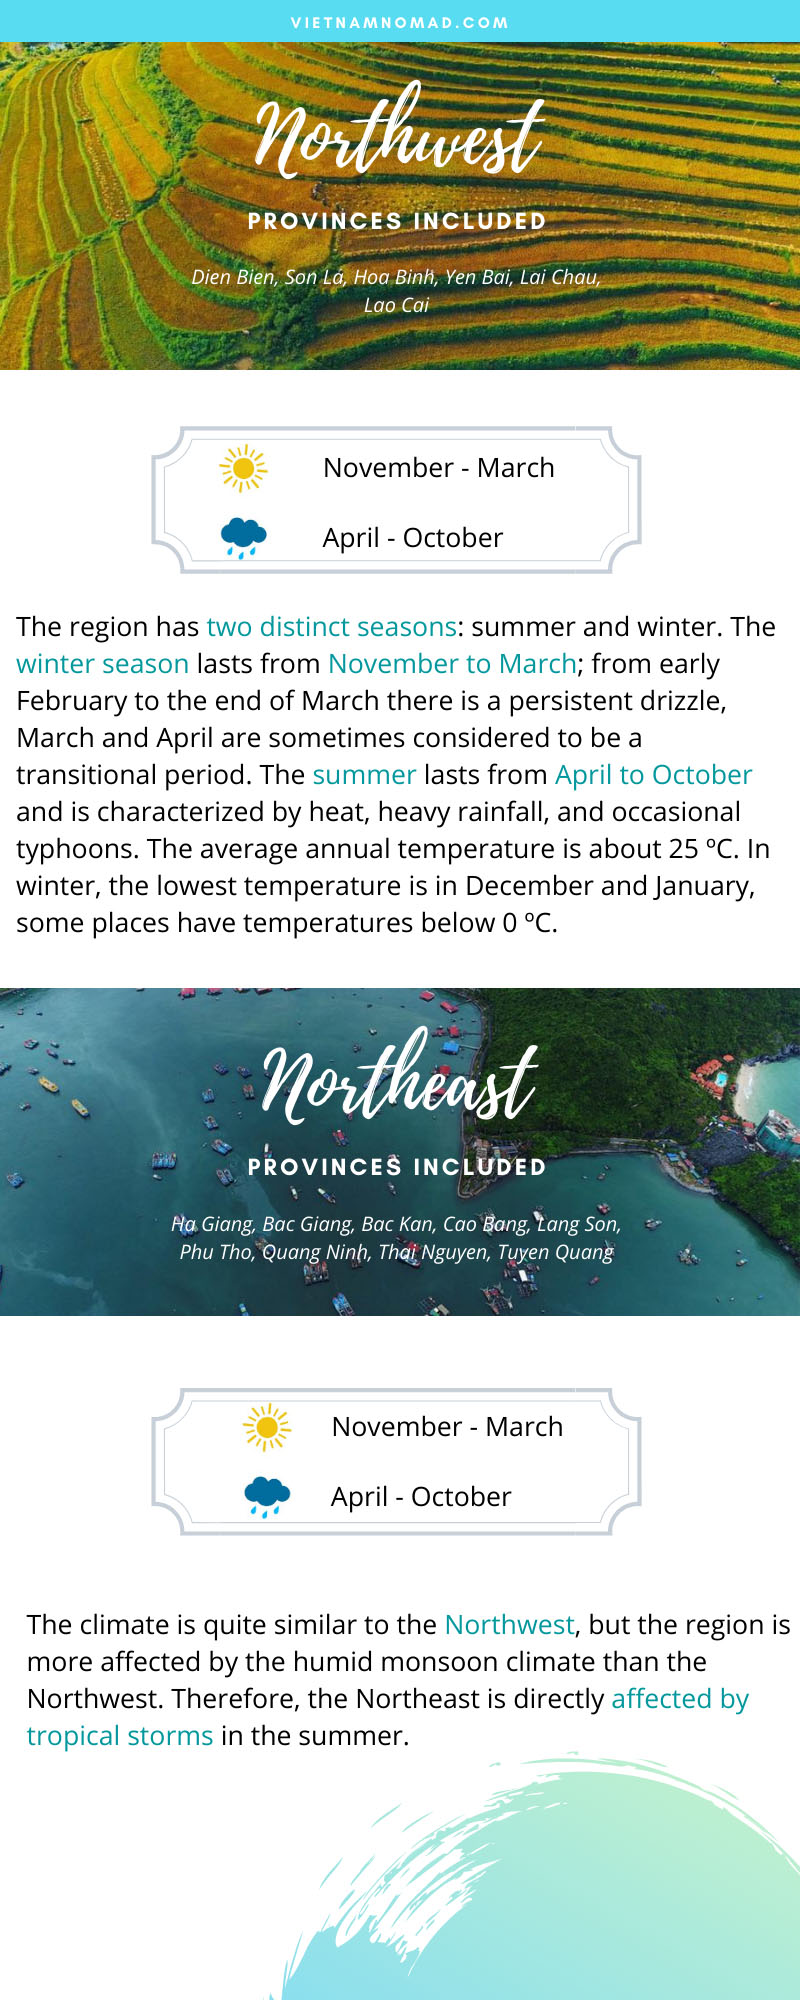 Vietnam weather infographic - The climate in Northwest and Northeast Vietnam